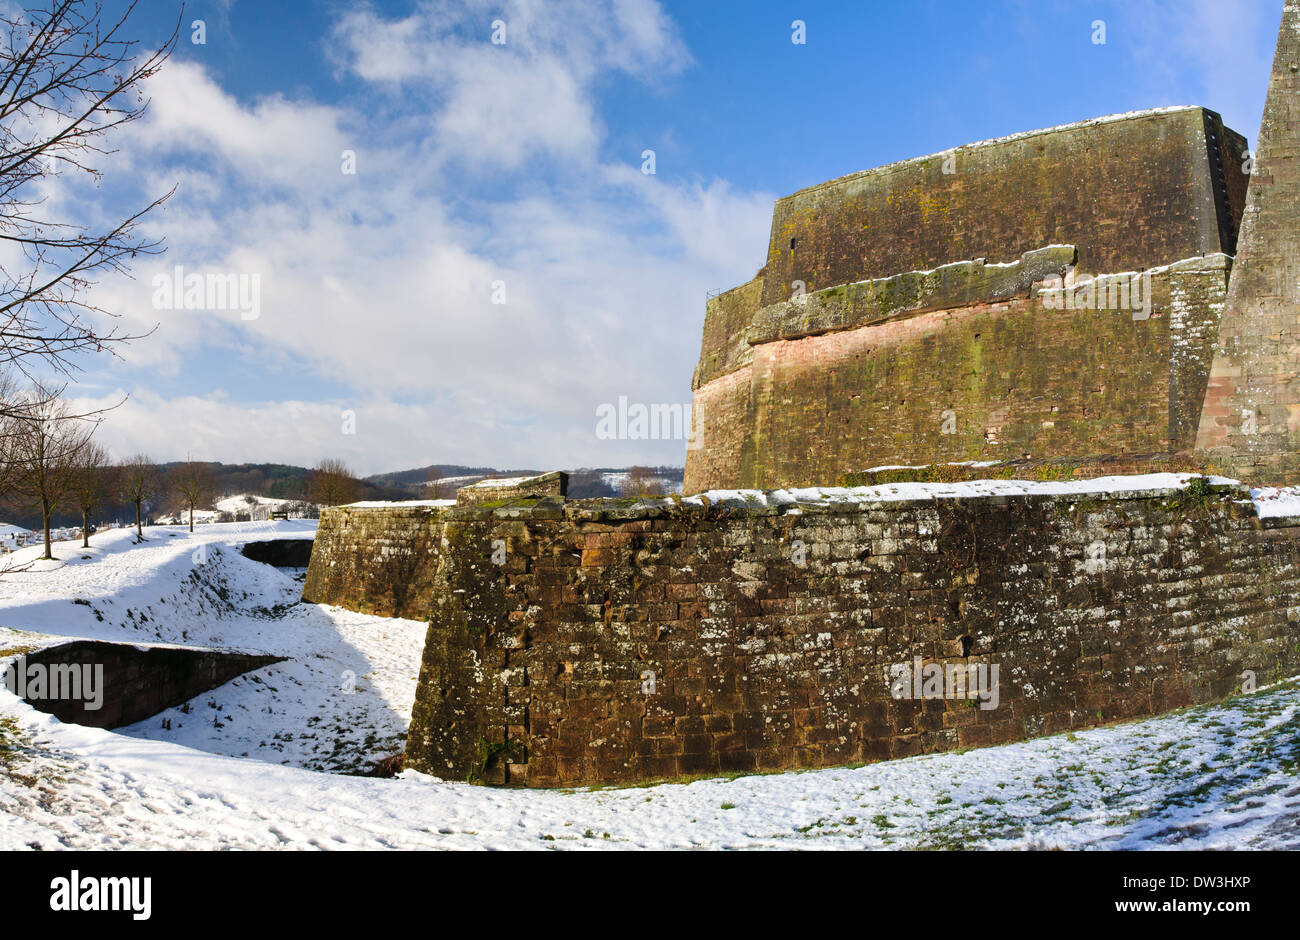 The Citadel high above the town of Bitche in the Vosges Regional Natural Park, Northern France. December. Stock Photo